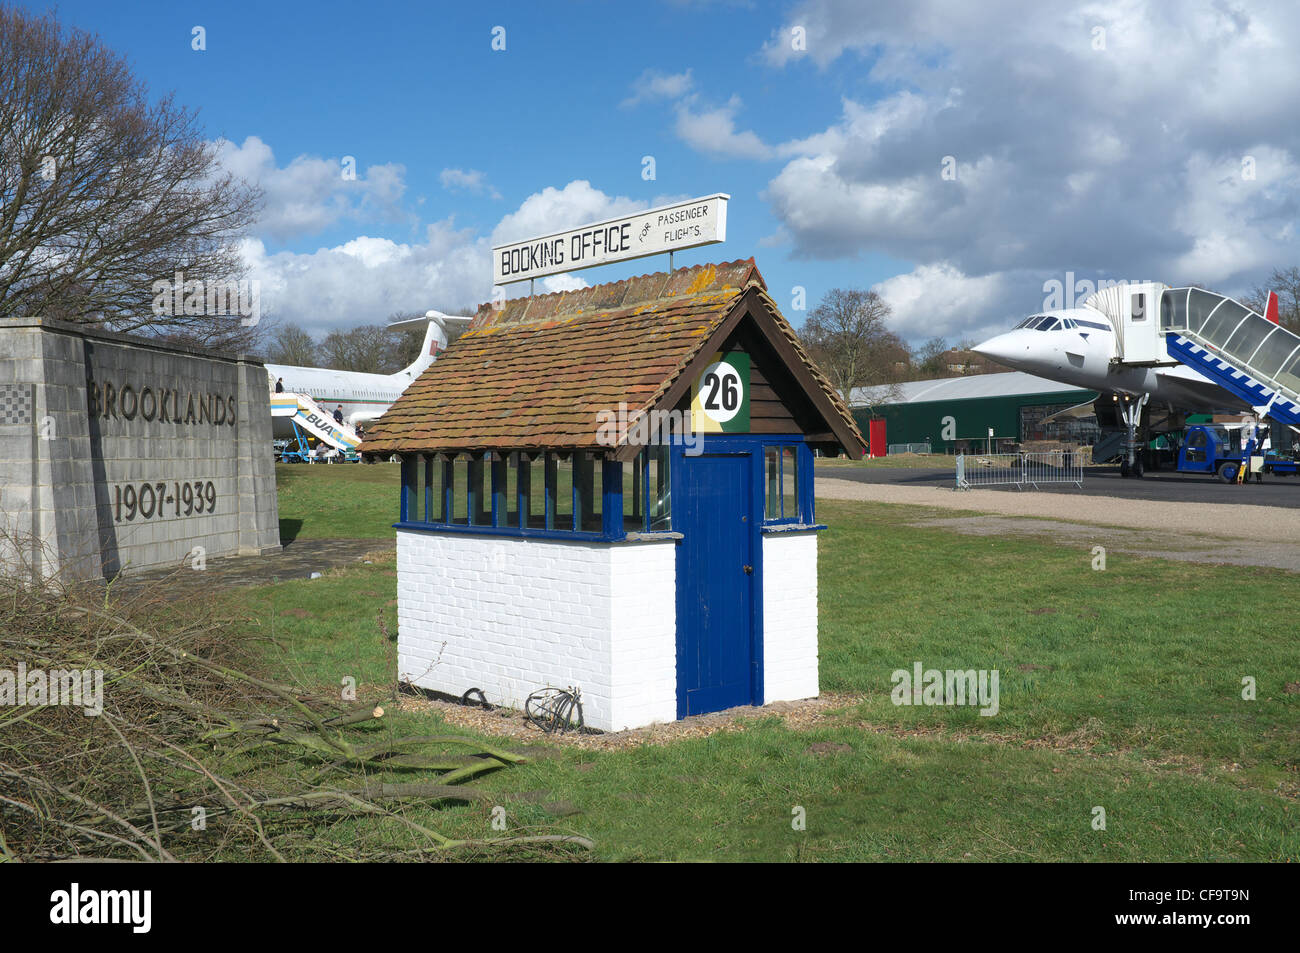 The worlds 1st Booking Office at Brooklands Museum, with Concorde G-BBDG in the background. Also the Brooklands Memorial Stock Photo